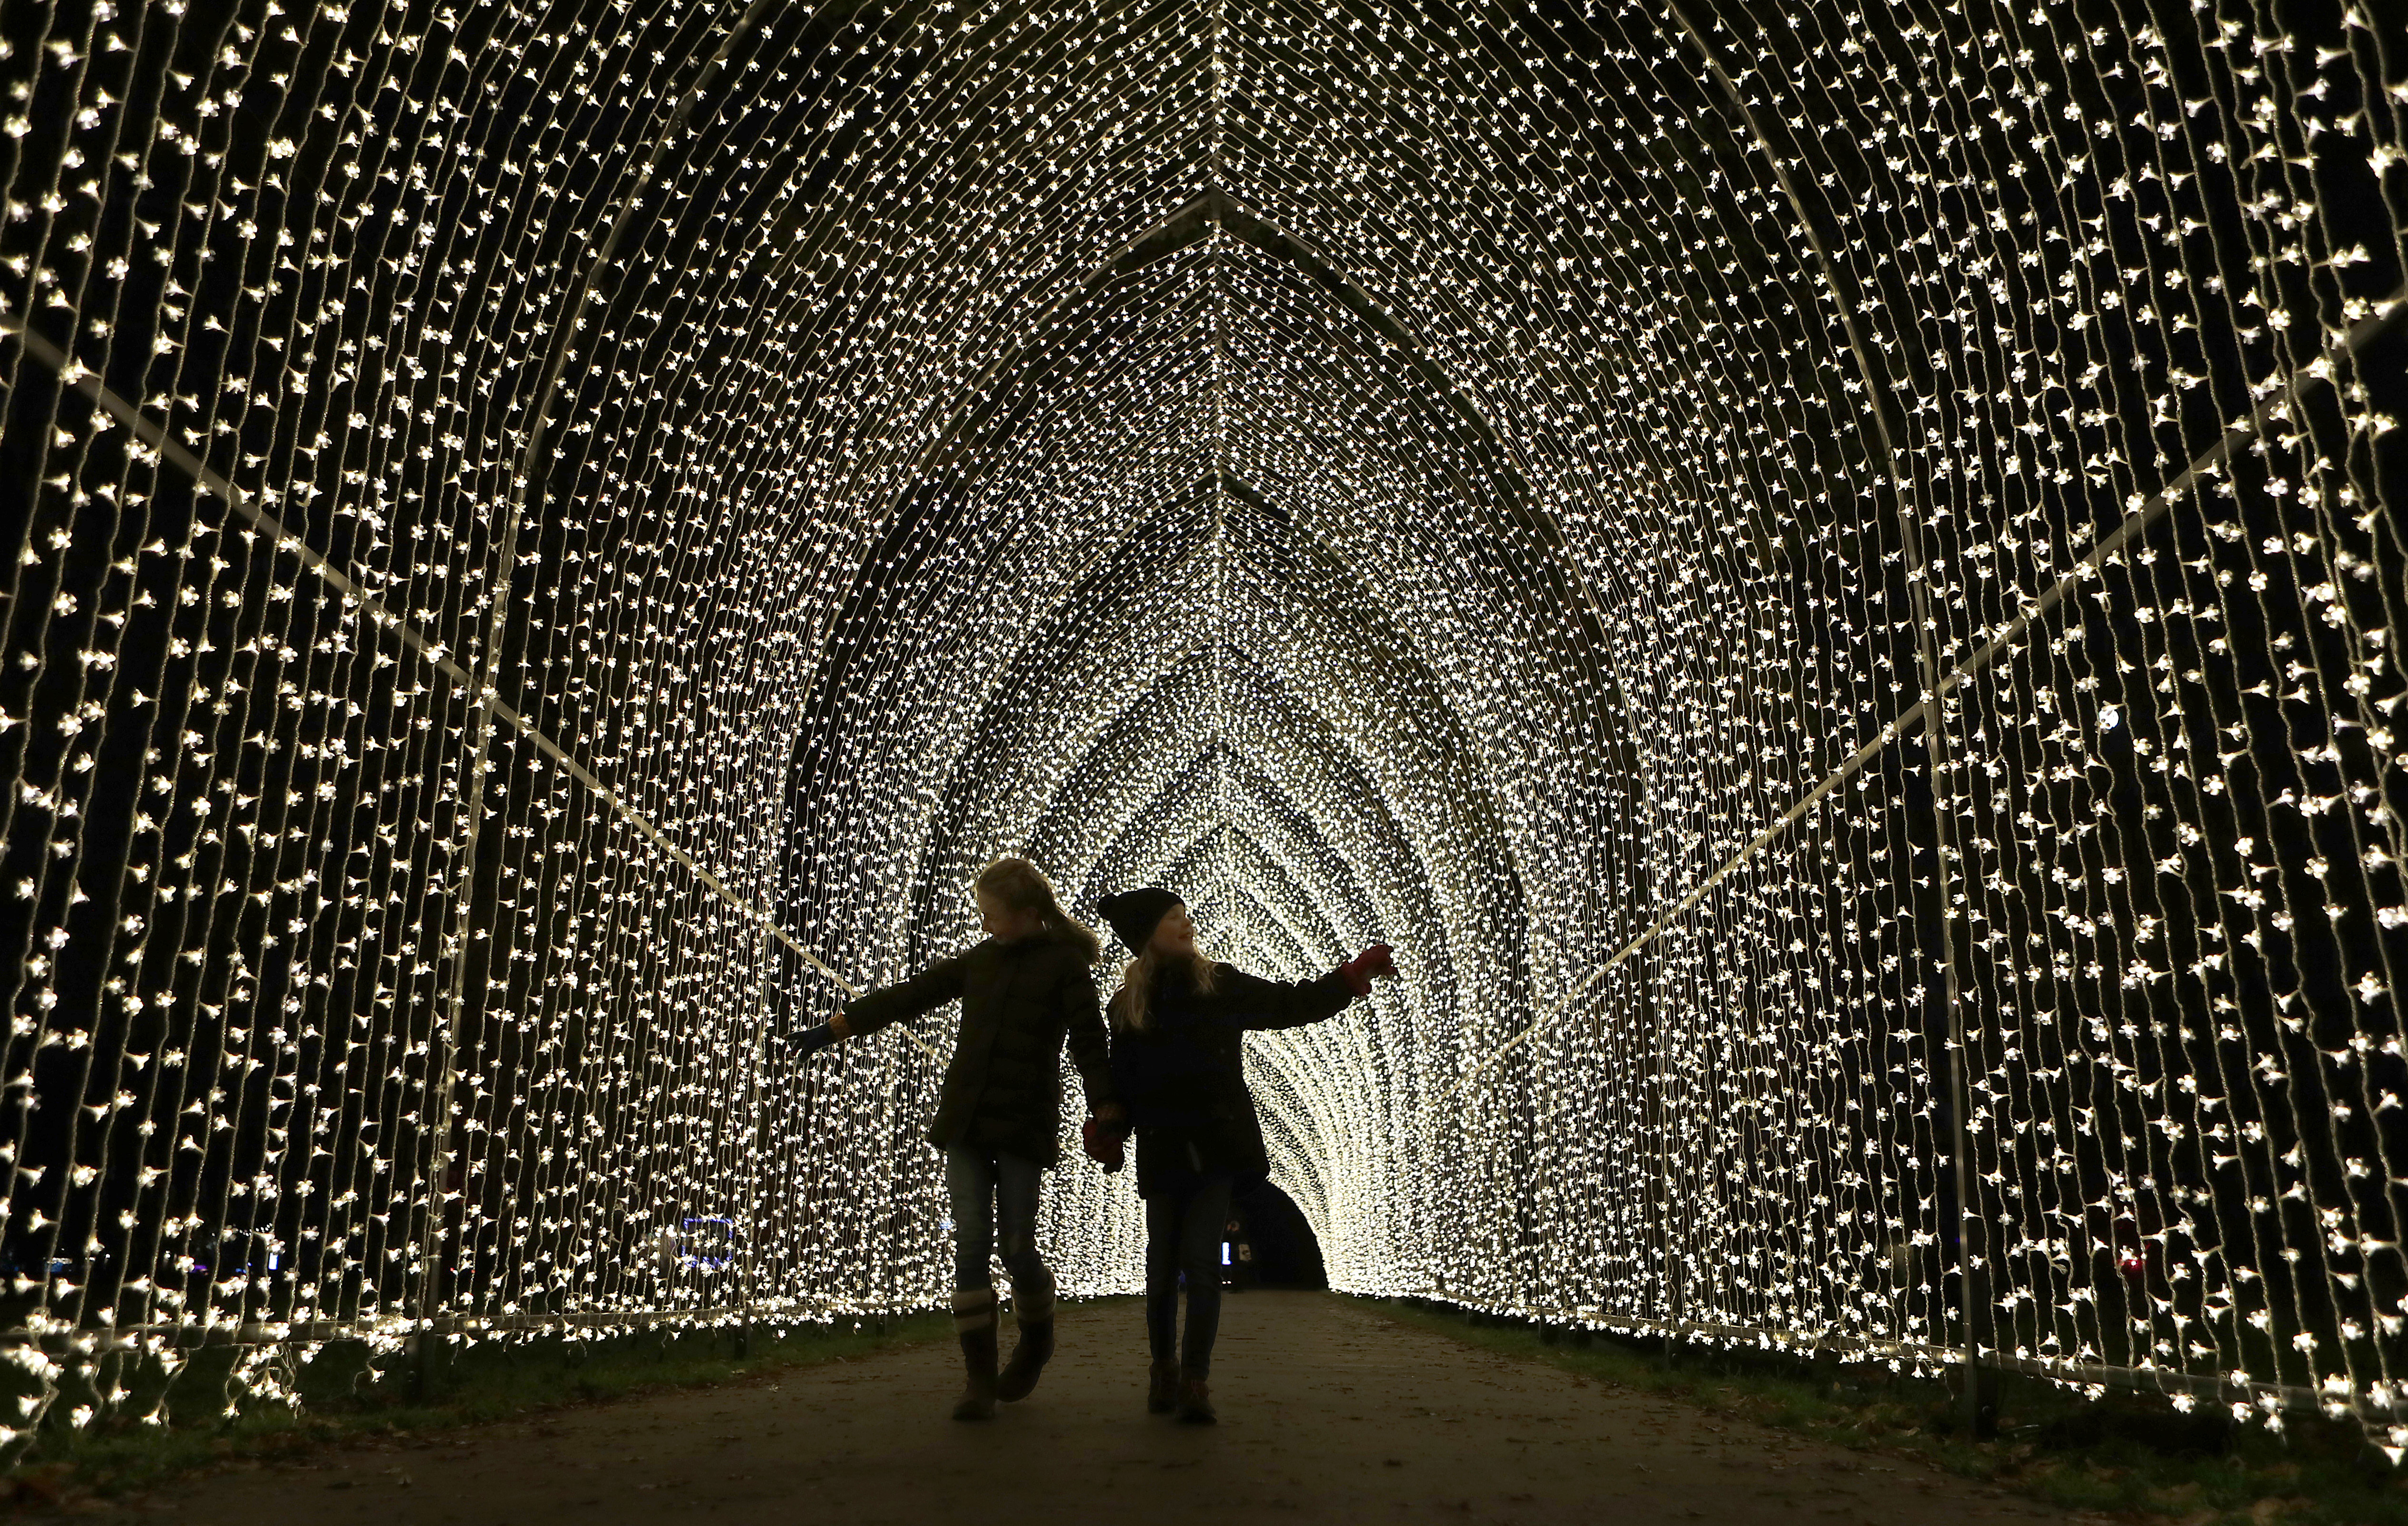 Children walk through the Cathedral of Light as part of the illuminated trail through Kew Gardens magnificent after-dark landscape, lit up by over one million twinkling lights in London, Wednesday, Nov. 21, 2018. The spectacular light and sound installations run from 22, November 2018 – 5, January 2019.(AP Photo/Frank Augstein)